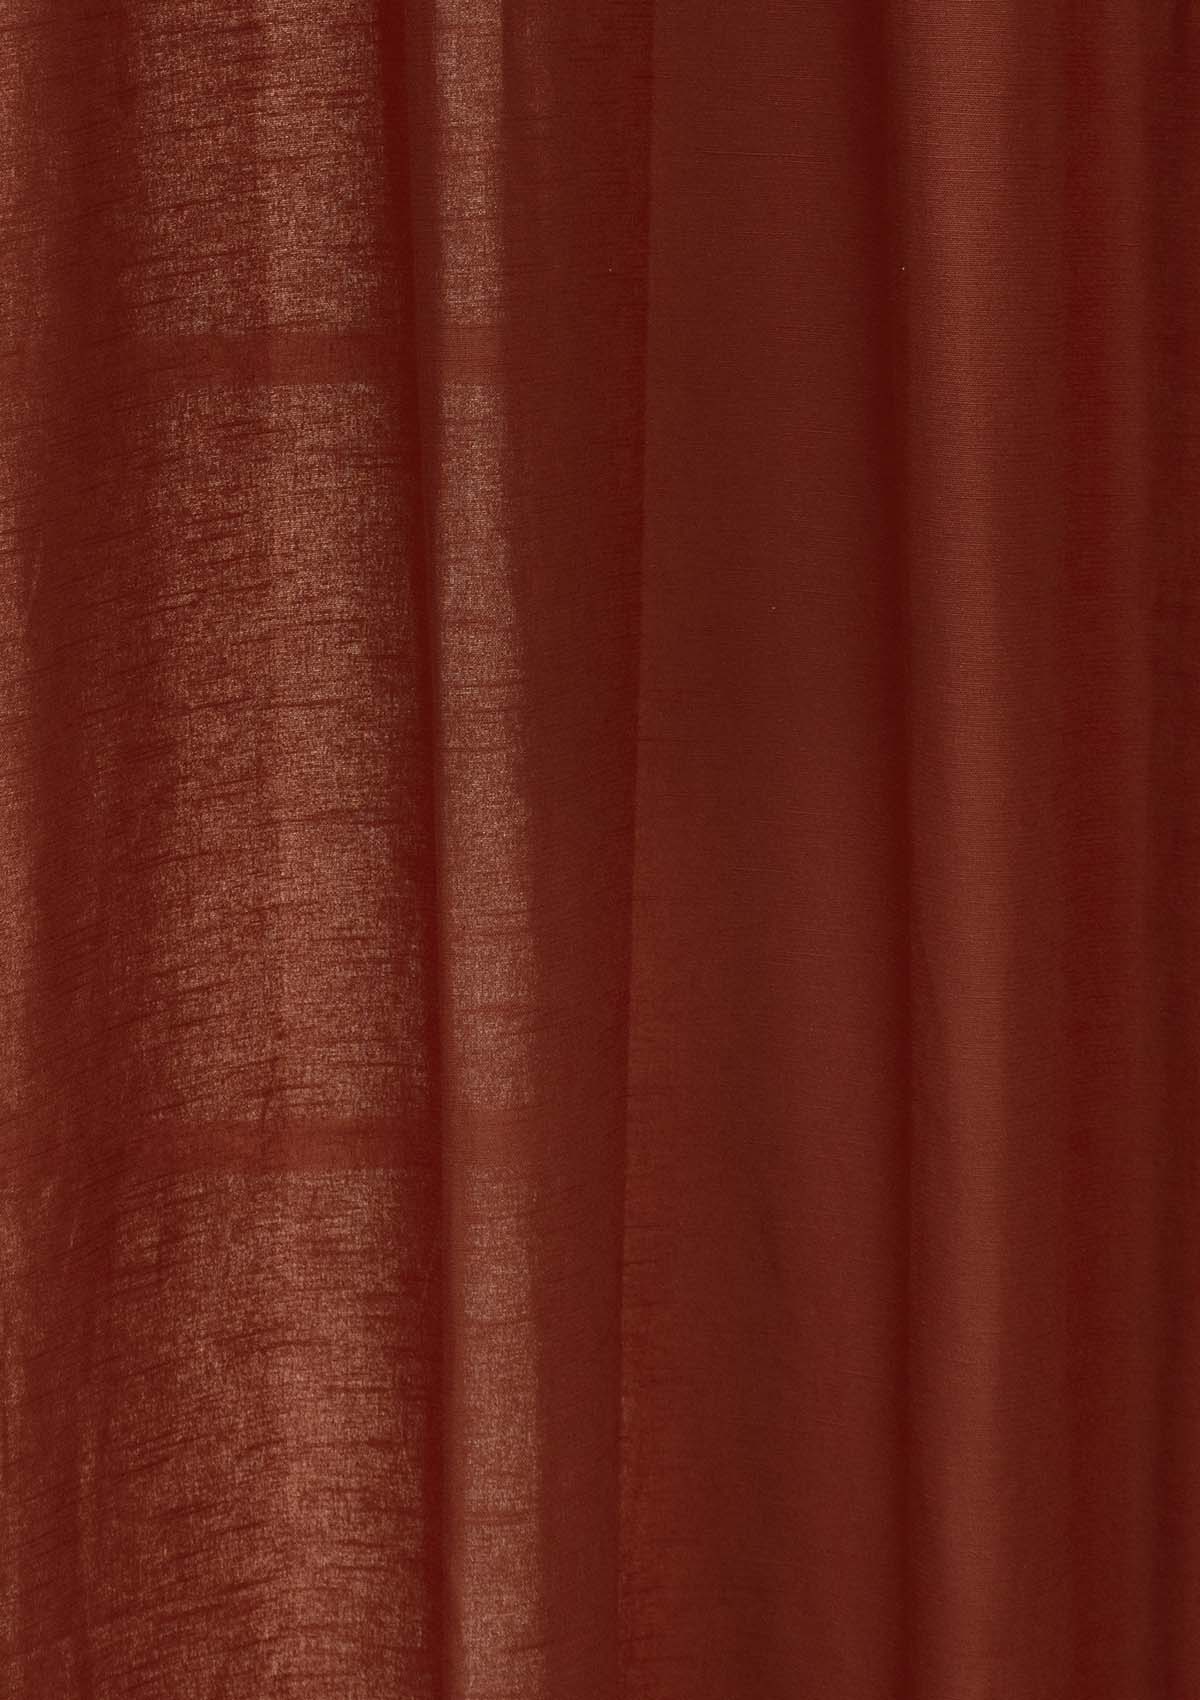 Solid Brick Red 100% cotton plain curtain for bedroom - Room darkening - Pack of 1